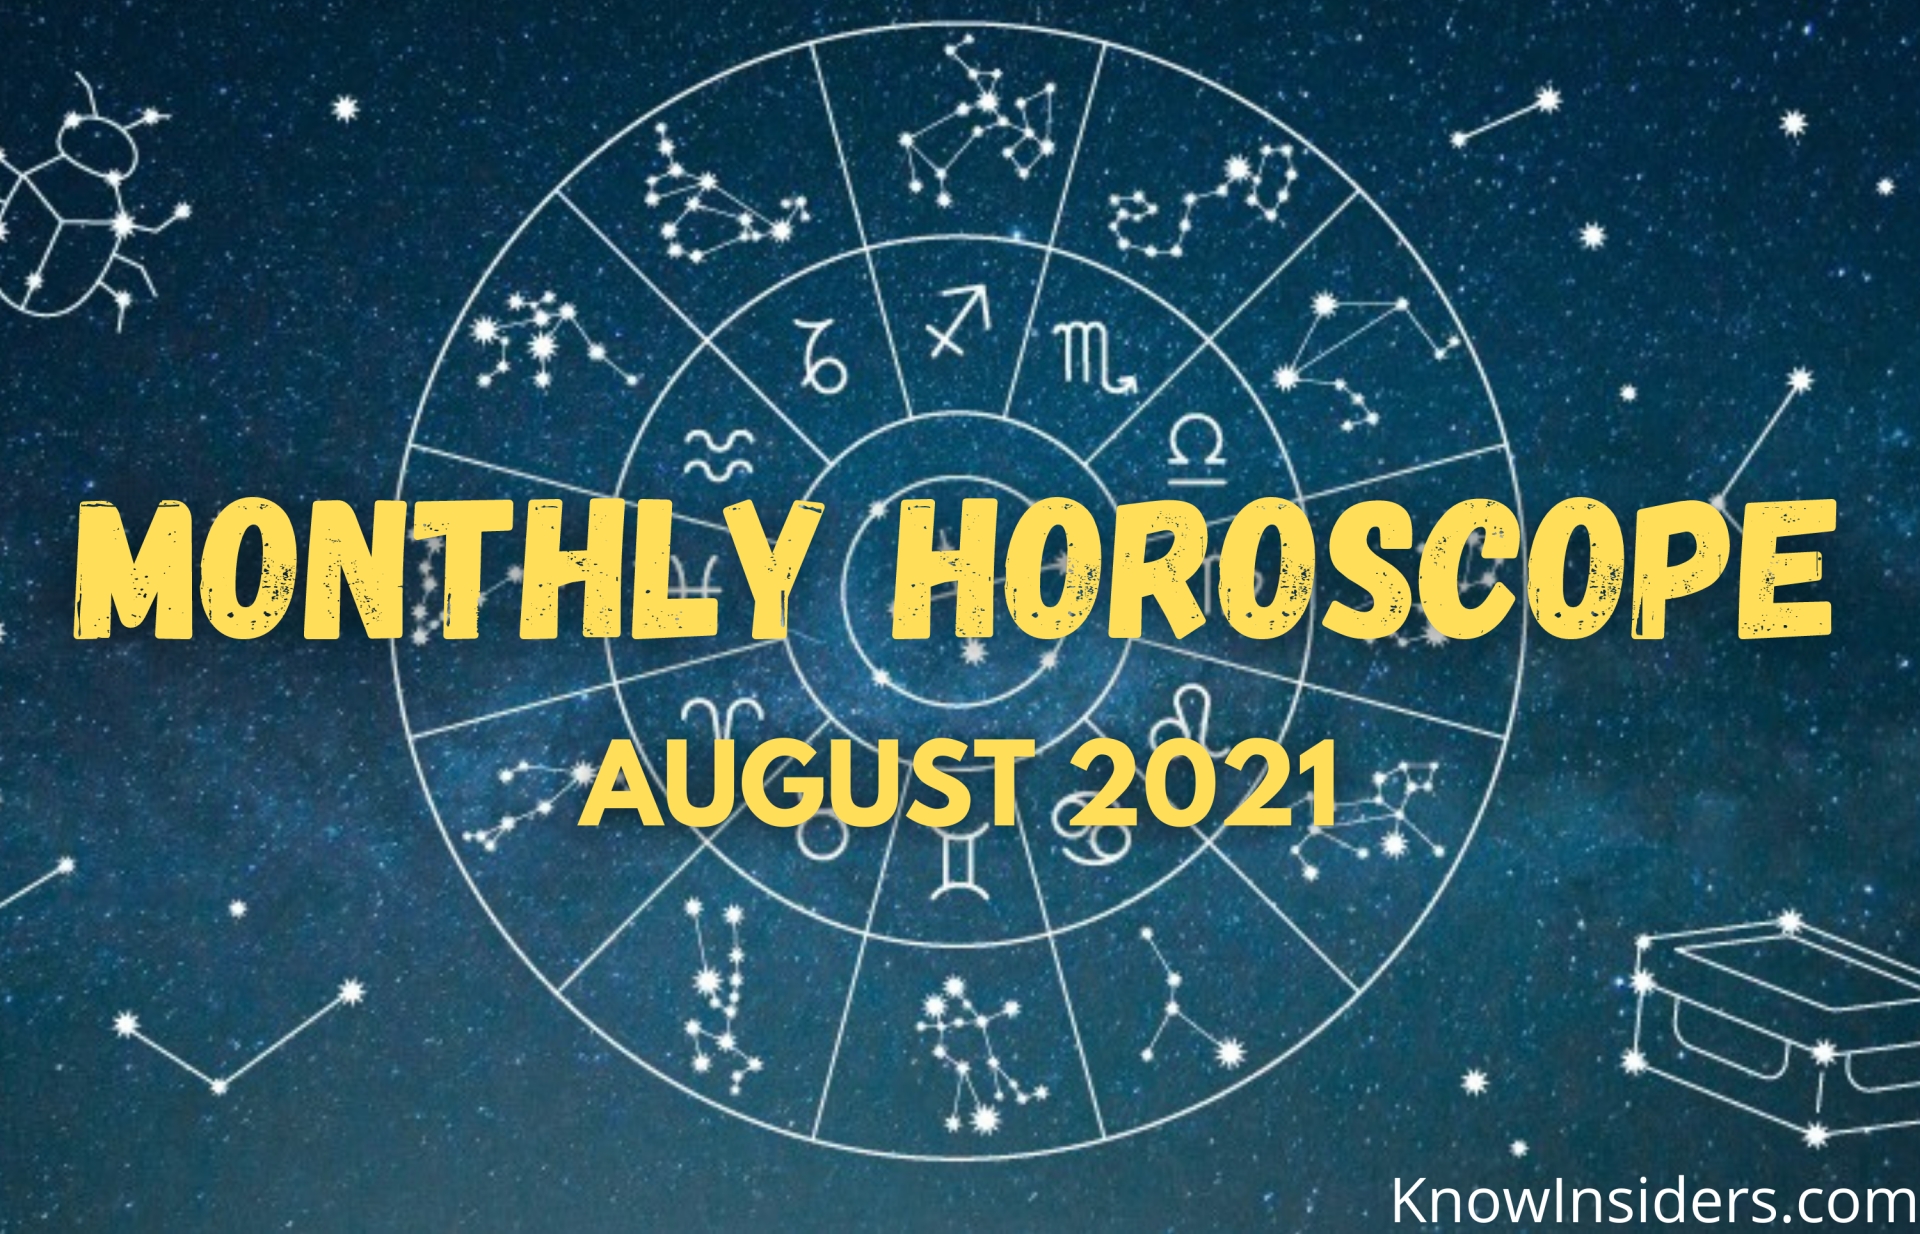 August 2021 Monthly Horoscope - Astrological Predictions for All 12 Zodiac Signs in Love, Career, Money and Health